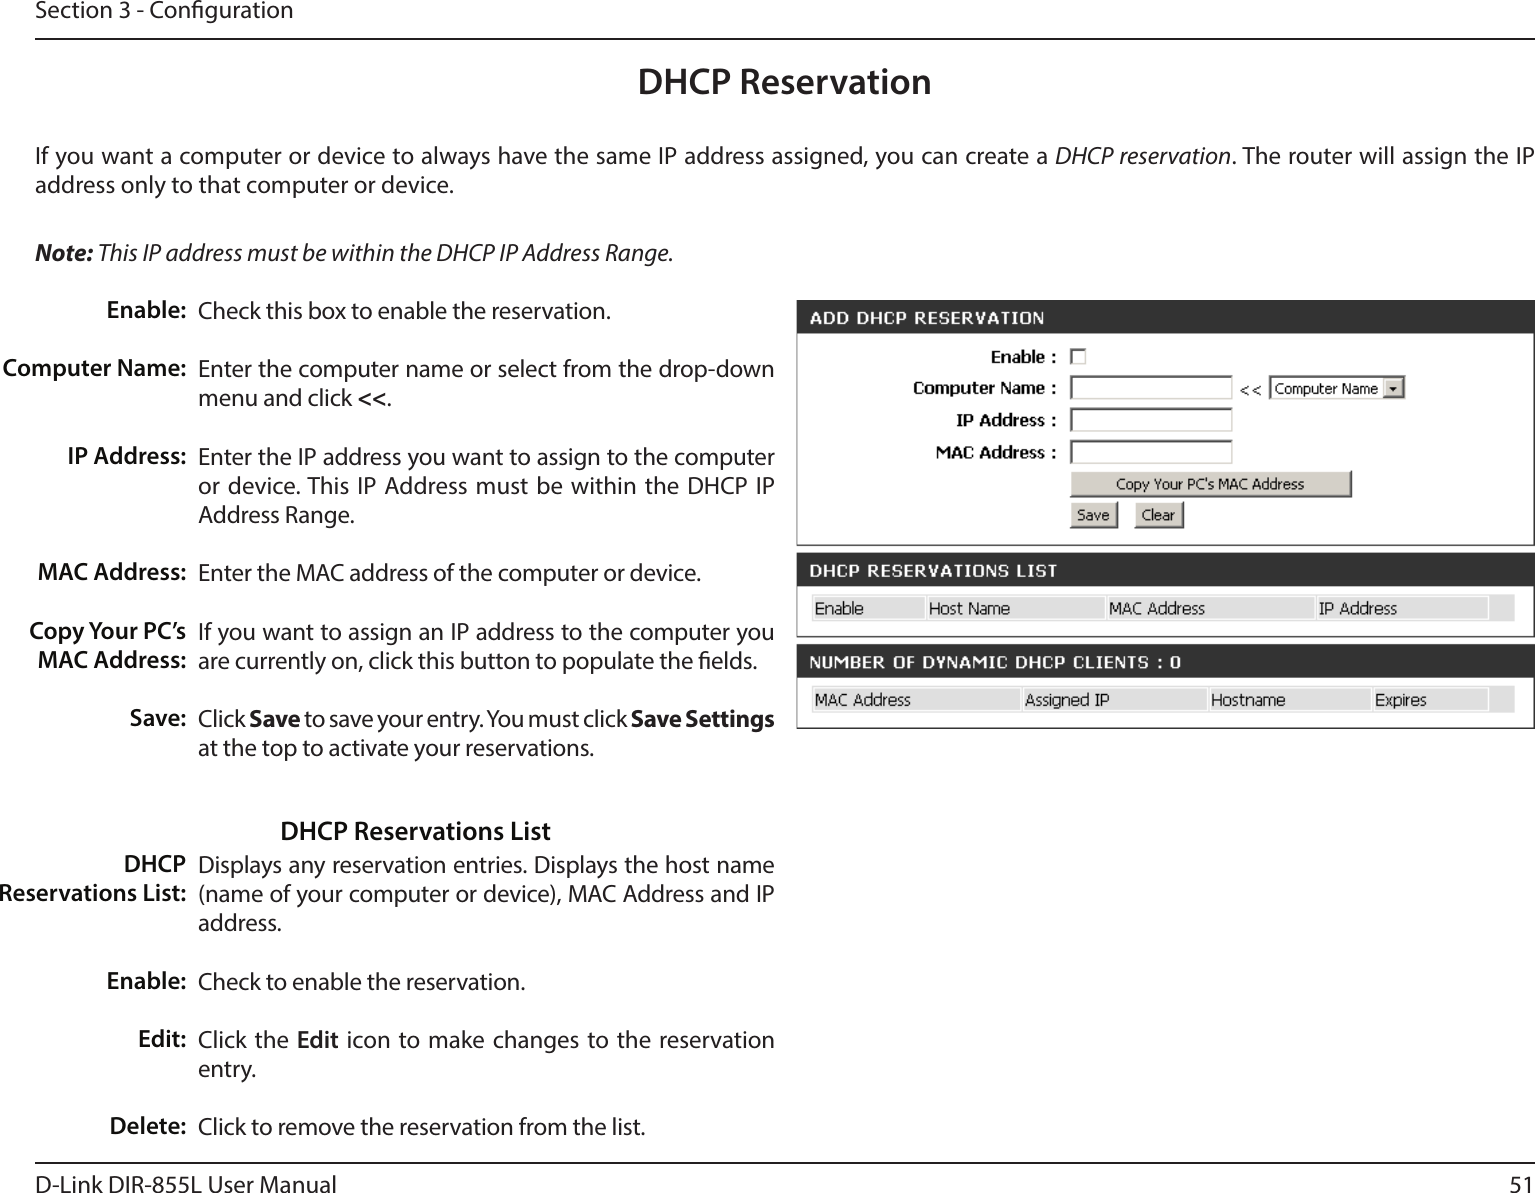 51D-Link DIR-855L User ManualSection 3 - CongurationDHCP ReservationIf you want a computer or device to always have the same IP address assigned, you can create a DHCP reservation. The router will assign the IP address only to that computer or device. Note: This IP address must be within the DHCP IP Address Range.Check this box to enable the reservation.Enter the computer name or select from the drop-down menu and click &lt;&lt;.Enter the IP address you want to assign to the computer or device. This IP Address must be within the DHCP IP Address Range.Enter the MAC address of the computer or device.If you want to assign an IP address to the computer you are currently on, click this button to populate the elds. Click Save to save your entry. You must click Save Settings at the top to activate your reservations. Displays any reservation entries. Displays the host name (name of your computer or device), MAC Address and IP address.Check to enable the reservation.Click the Edit icon to make changes to the reservation entry.Click to remove the reservation from the list.Enable:Computer Name:IP Address:MAC Address:Copy Your PC’s MAC Address:Save:DHCP Reservations List:Enable:Edit:Delete:DHCP Reservations List